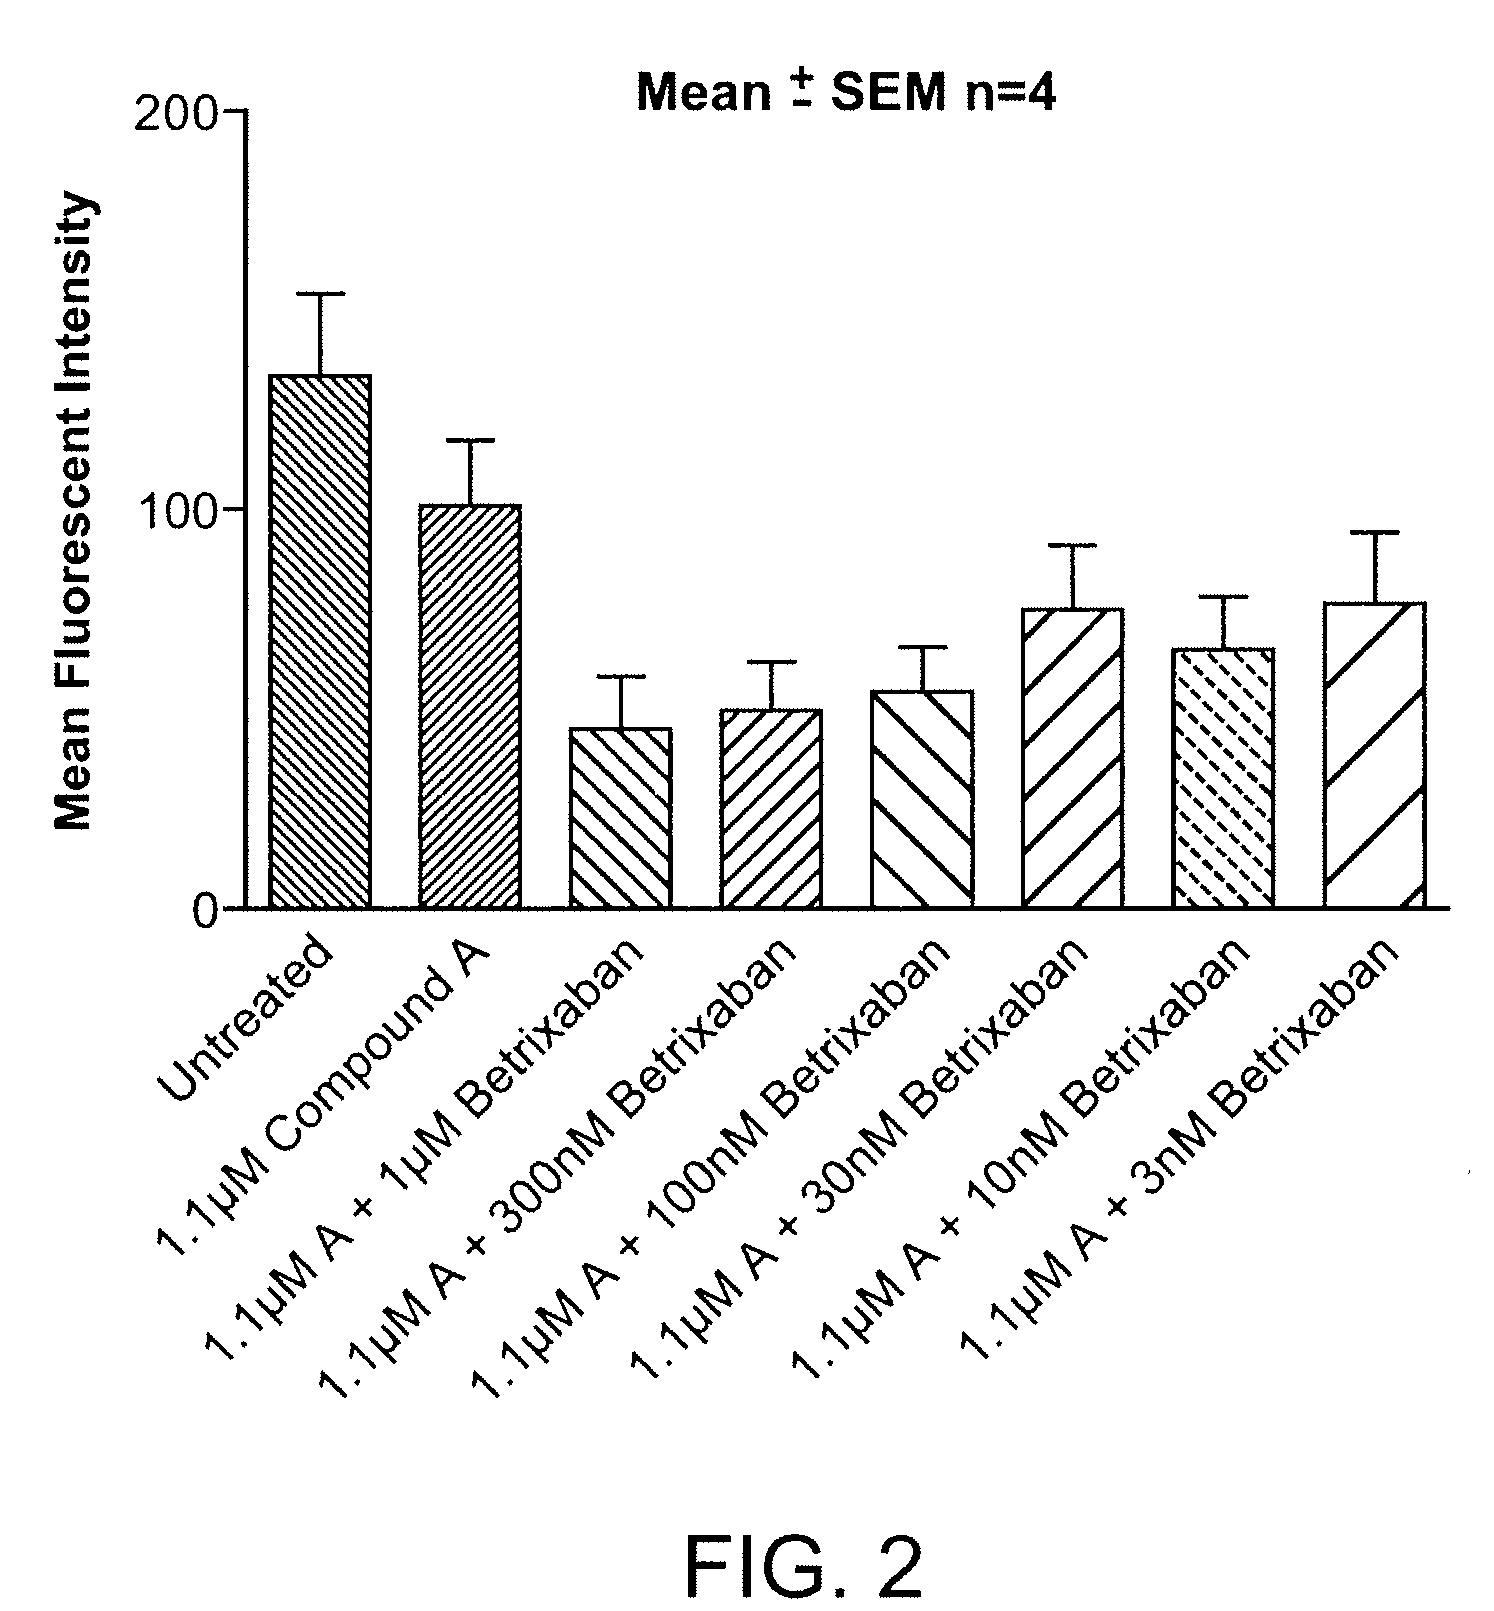 Combination therapy with a compound acting as a platelet adp receptor inhibitor